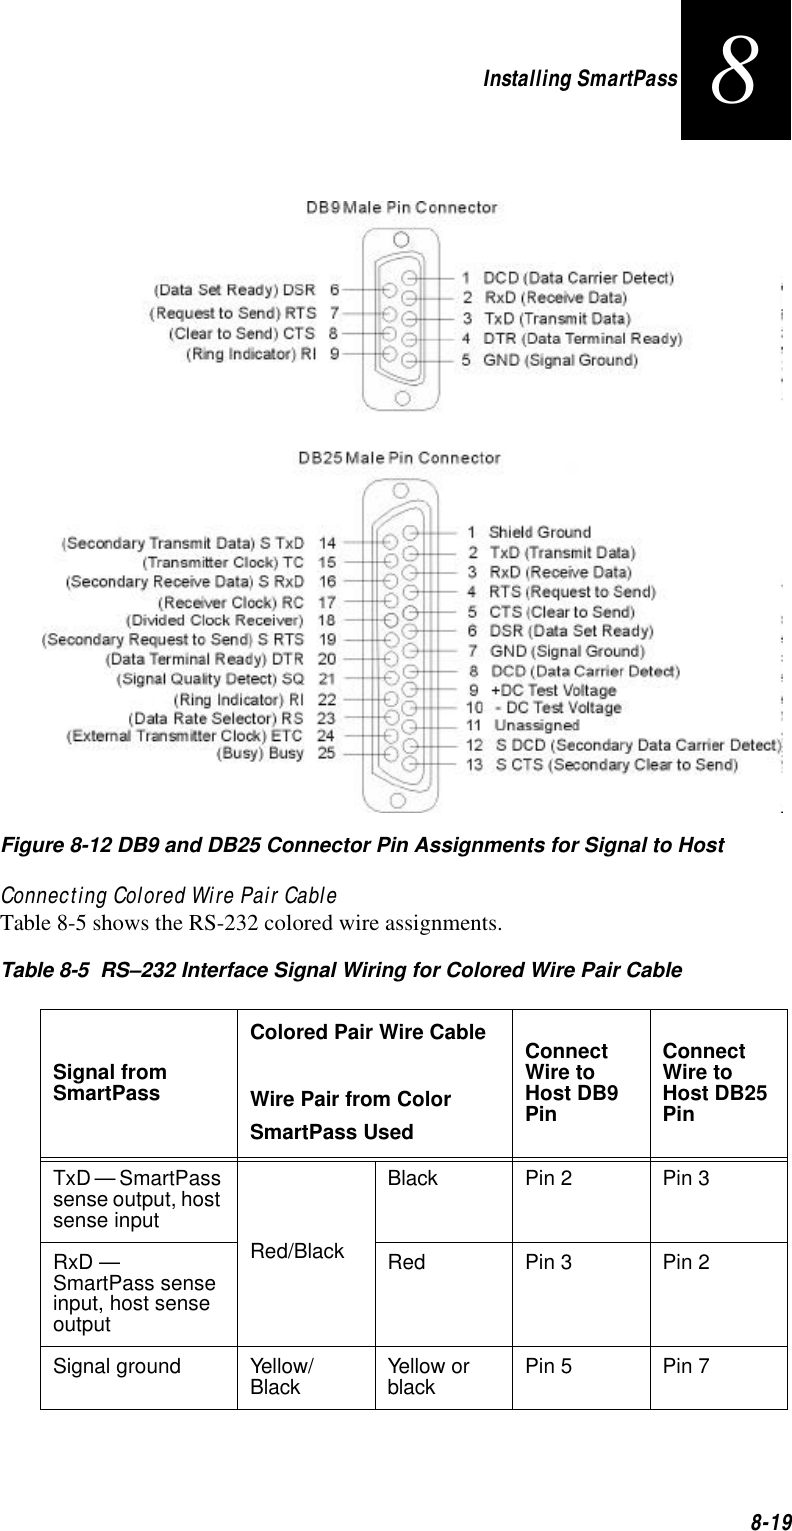 Installing SmartPass8-198 Figure 8-12 DB9 and DB25 Connector Pin Assignments for Signal to HostConnecting Colored Wire Pair CableTable 8-5 shows the RS-232 colored wire assignments. Table 8-5  RS–232 Interface Signal Wiring for Colored Wire Pair CableSignal from SmartPassColored Pair Wire CableWire Pair from Color SmartPass UsedConnect Wire to Host DB9 PinConnect Wire to Host DB25 PinTxD — SmartPass sense output, host sense inputRed/BlackBlack Pin 2 Pin 3 RxD — SmartPass sense input, host sense outputRed Pin 3 Pin 2 Signal ground Yellow/Black Yellow or black Pin 5 Pin 7